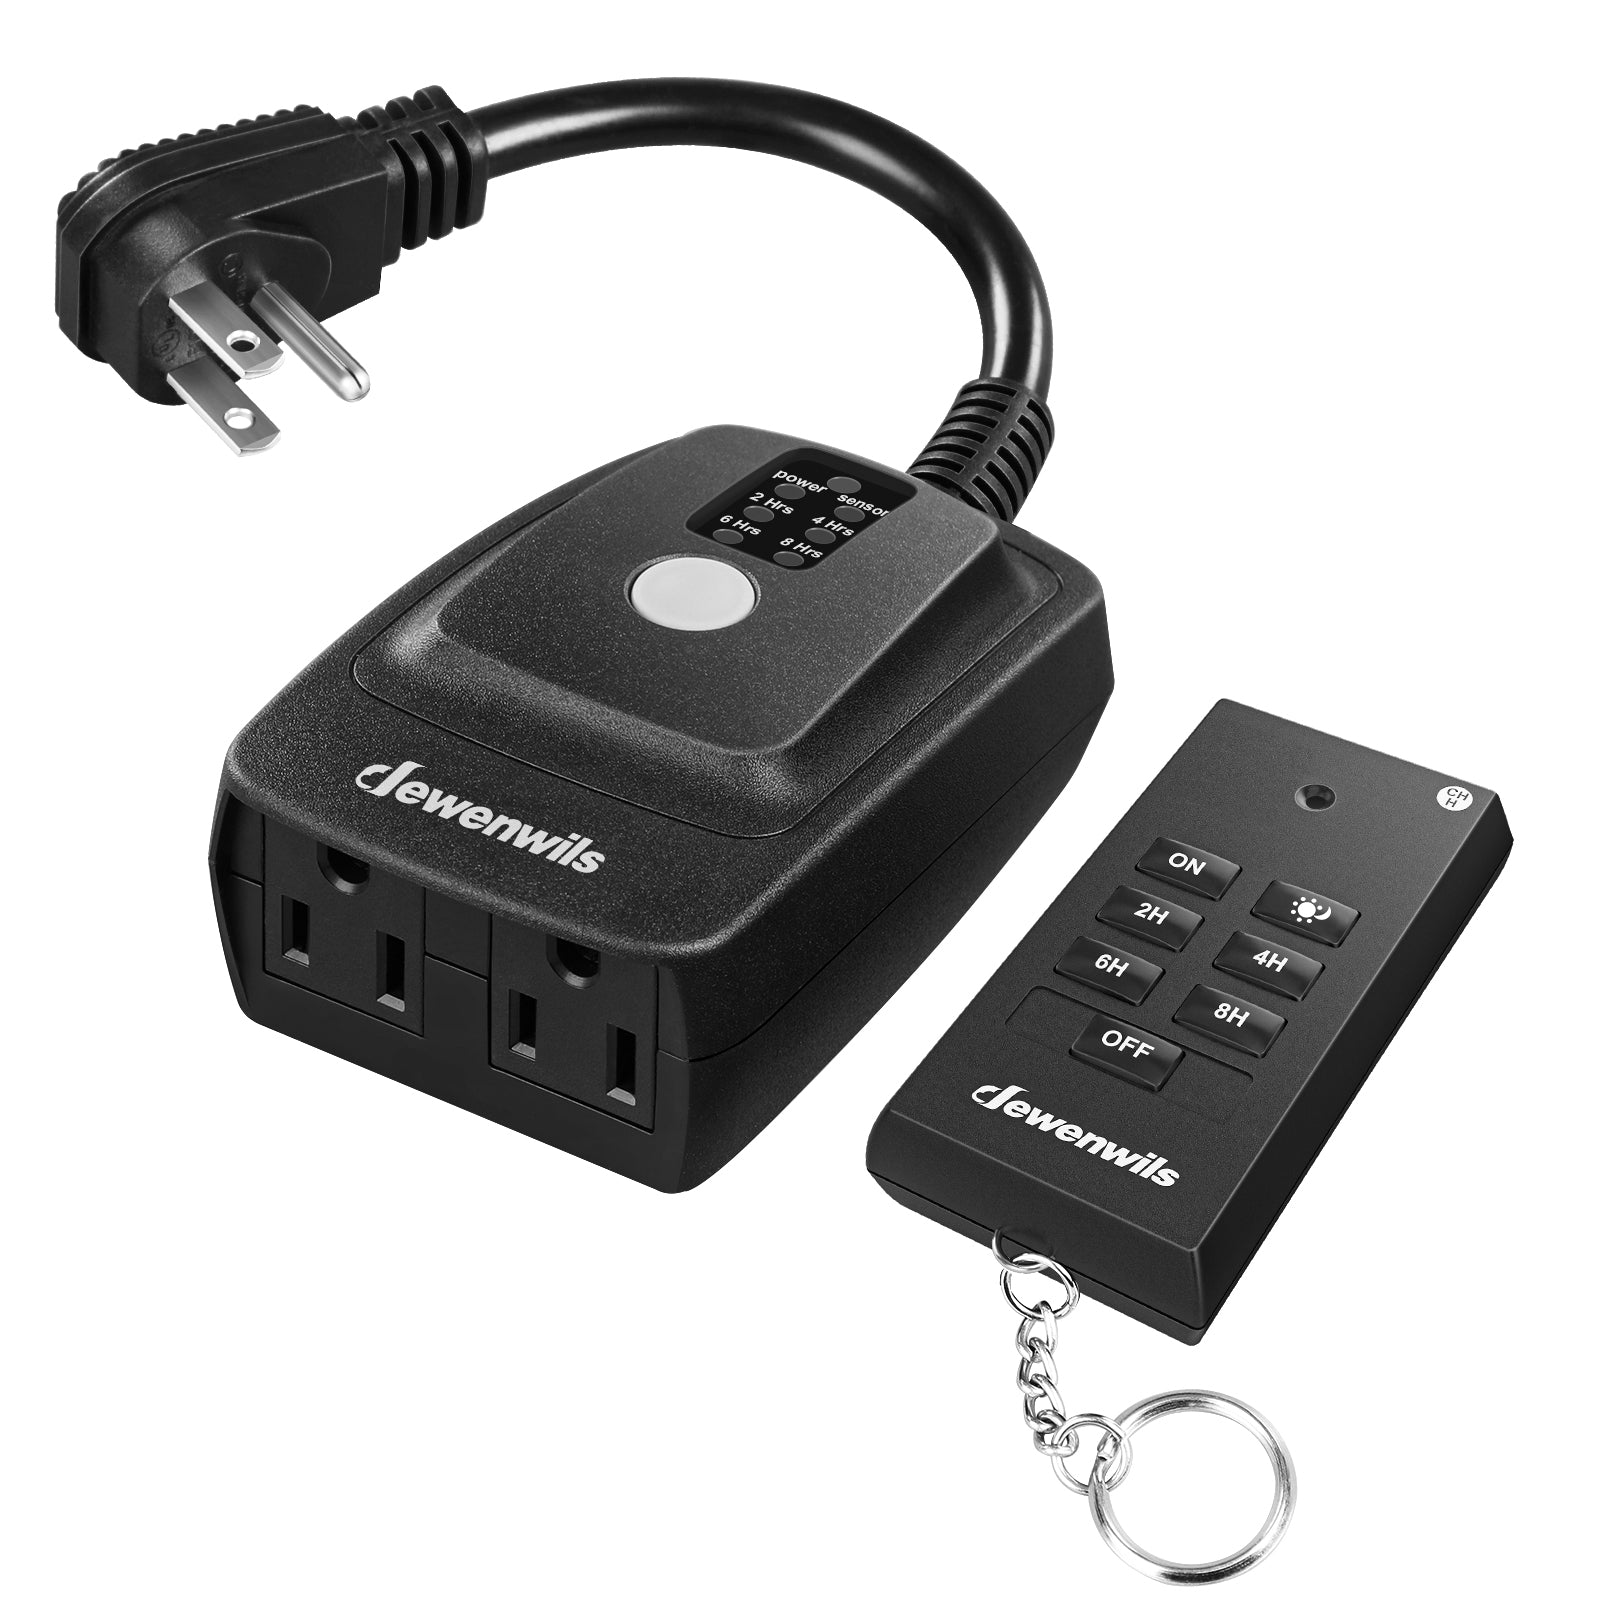 DEWENWILS Wireless Remote Control Outlet,100 Feet Range,Outdoor Electrical Outlet Switch, Black